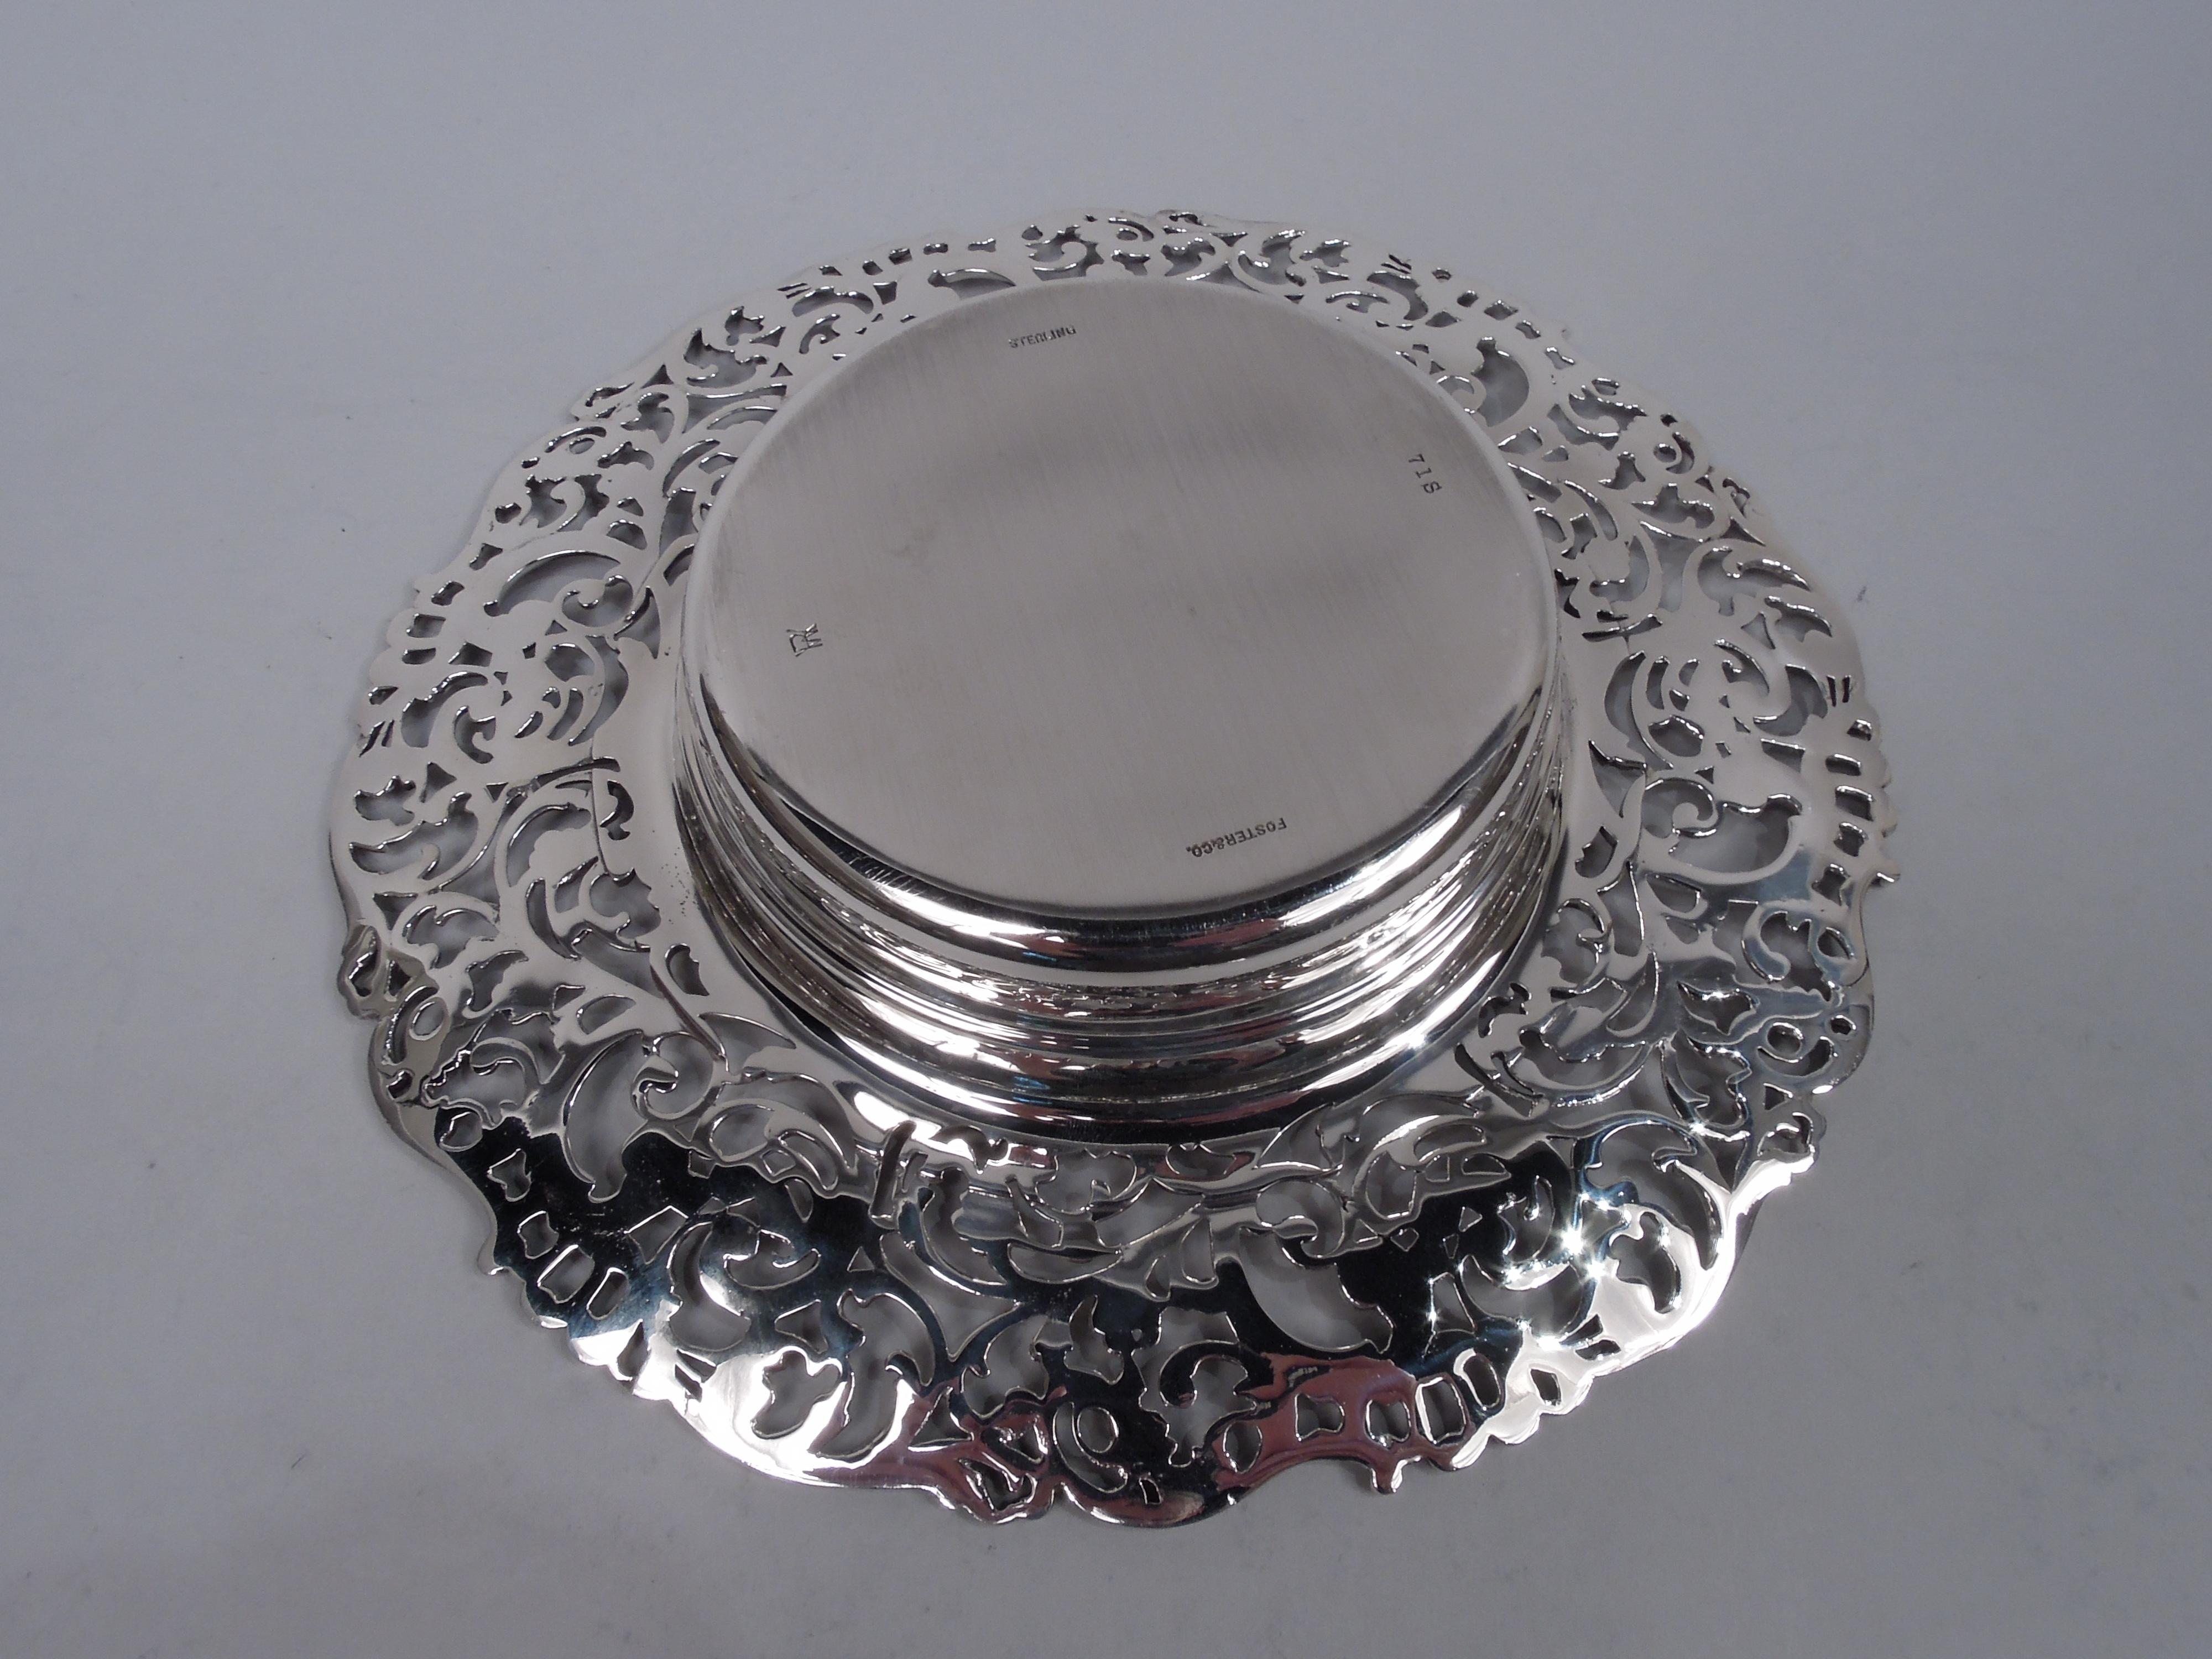 Antique Roger Williams American Edwardian Sterling Silver Butter Dish 3